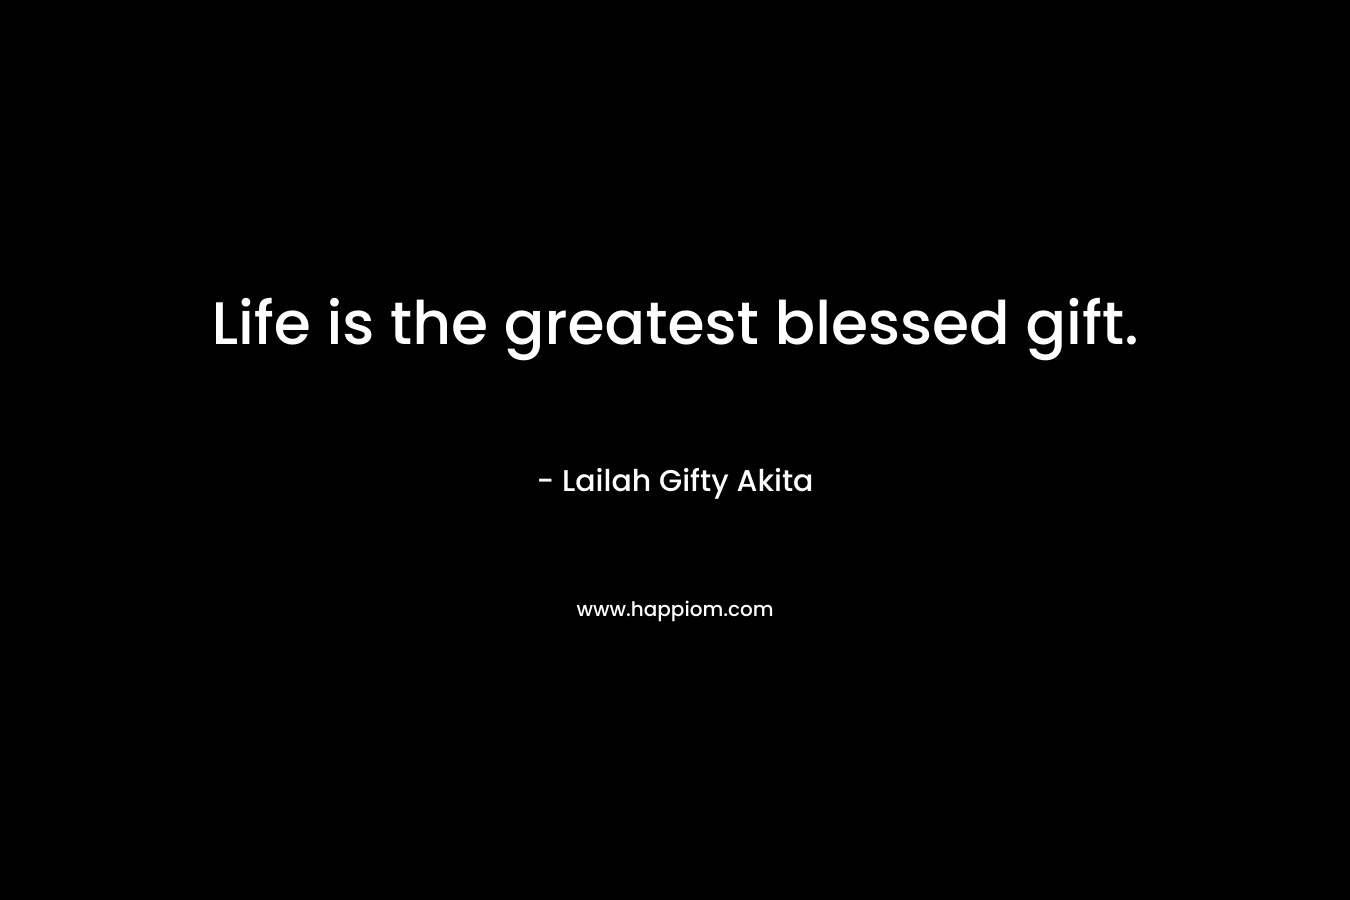 Life is the greatest blessed gift.